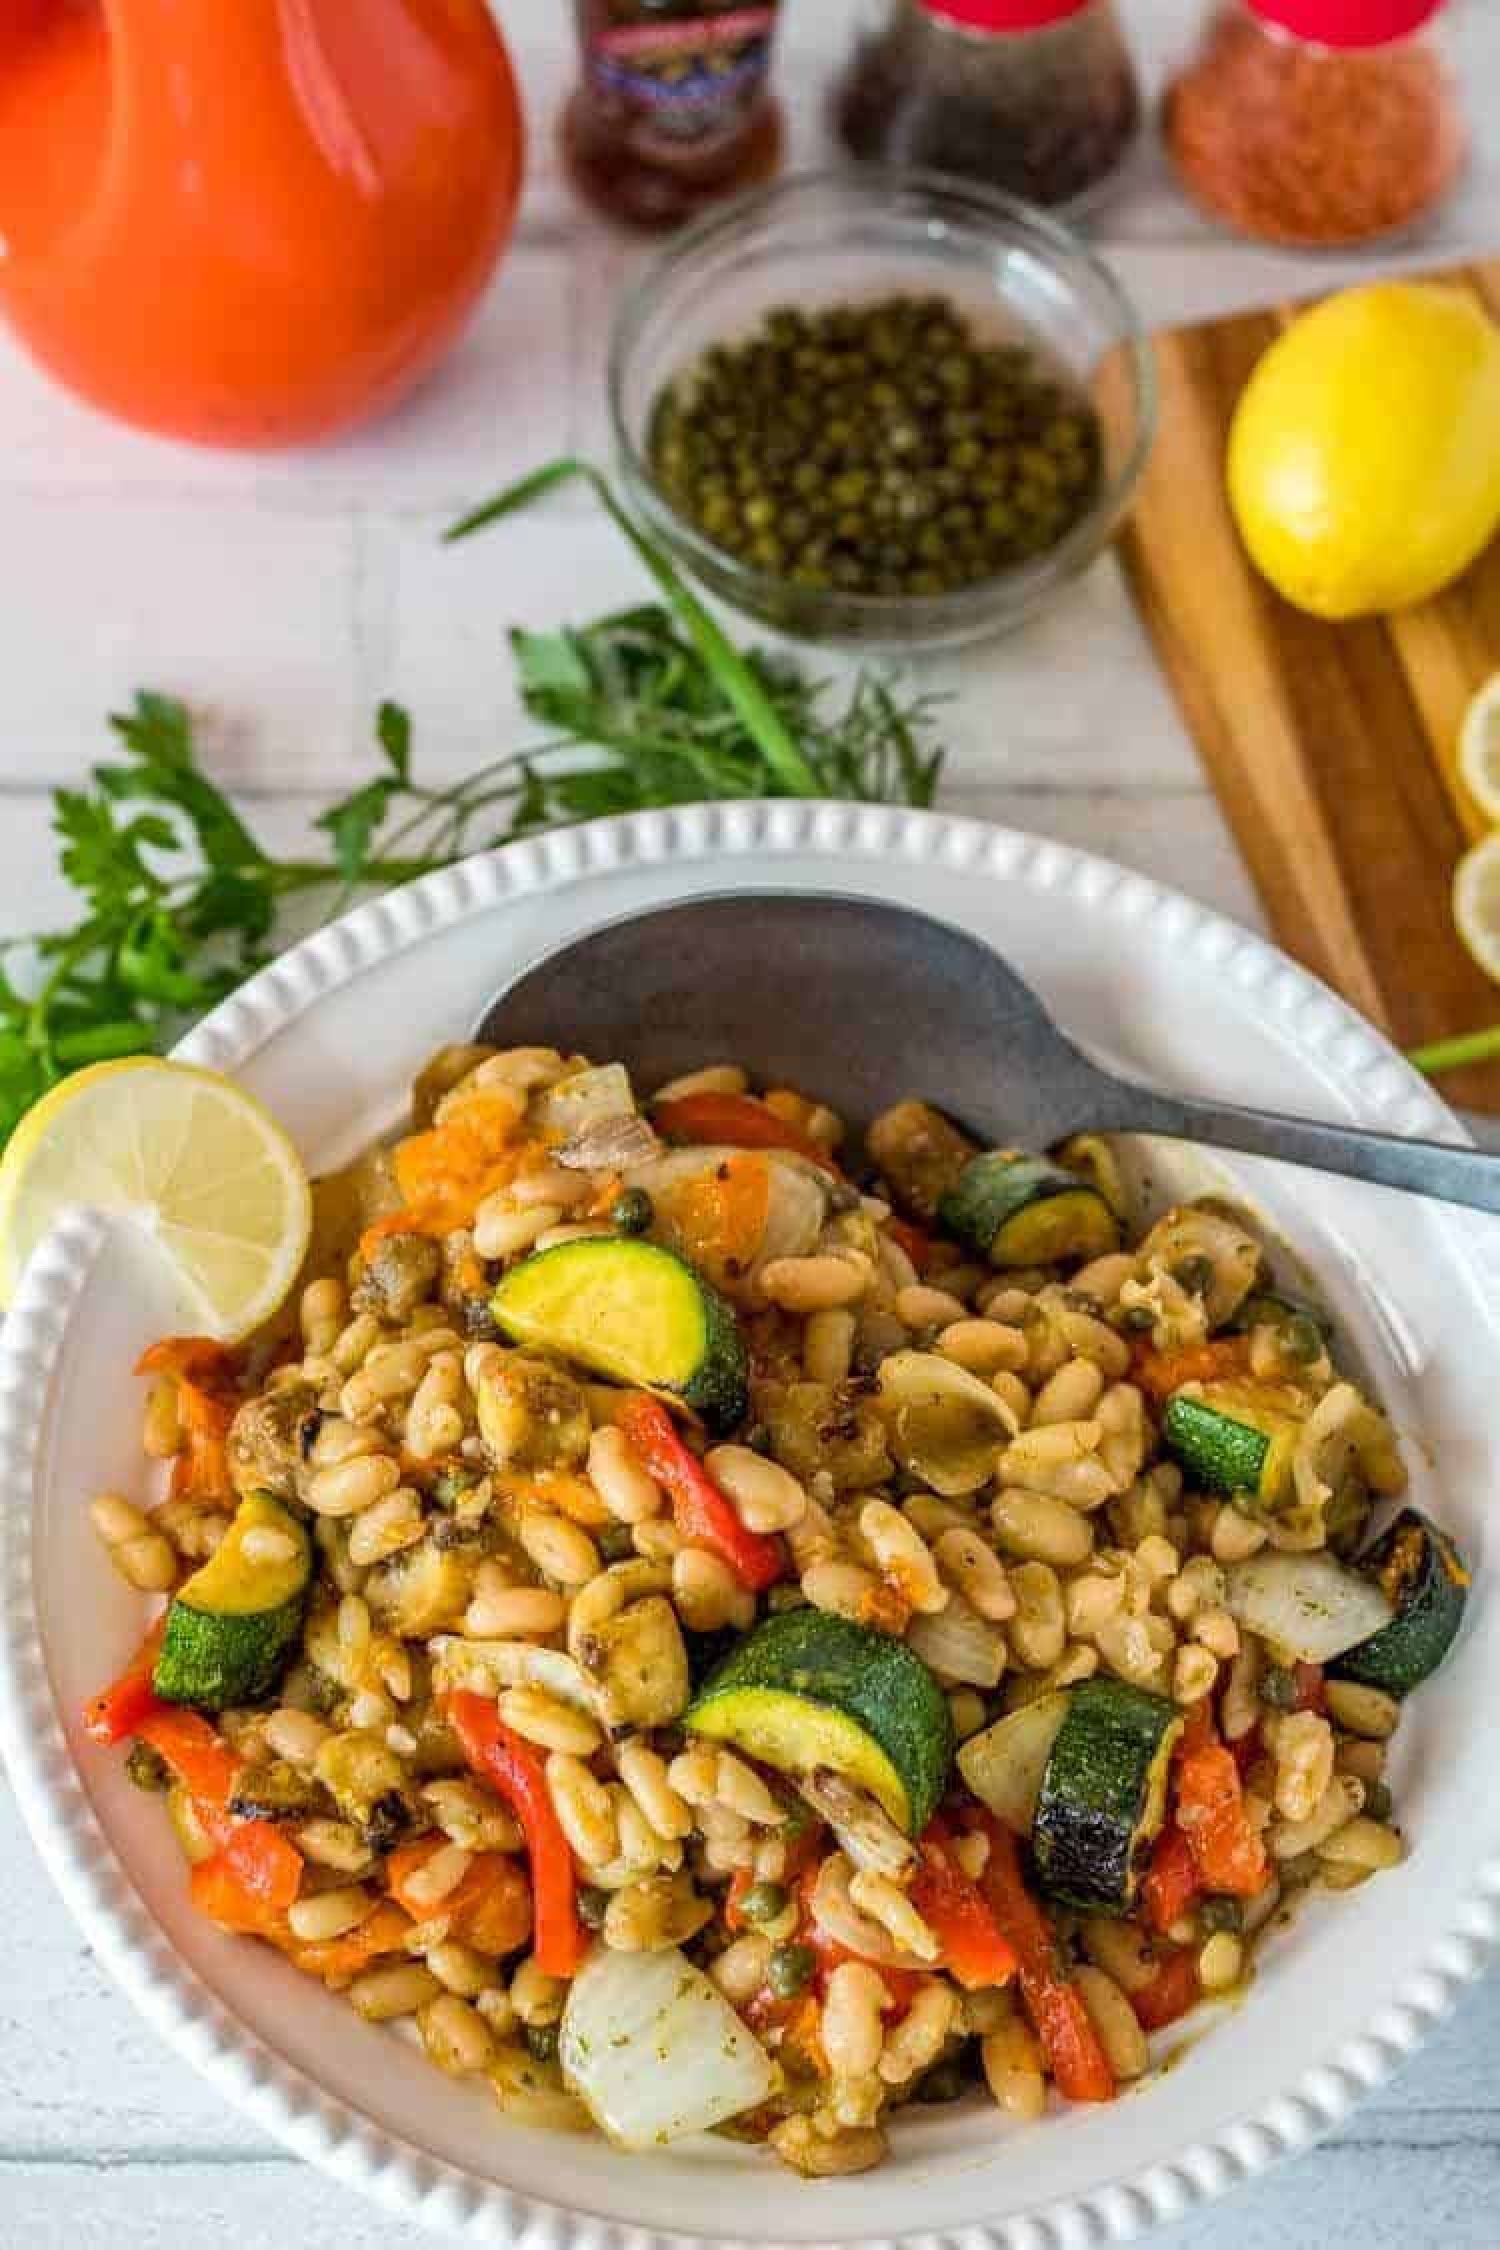 <p>This flageolet salad is prepared French-style with grilled summer veggies and capers in a zingy anchovy-dijon vinaigrette. If you can't find flageolets, you can sub white beans in a pinch, but they should be available at local specialty grocery stores. <a href="https://beyondmeresustenance.com/summer-flageolet-beans-with-grilled-veggies-provencal/" rel="noopener">Get the recipe here.</a></p>